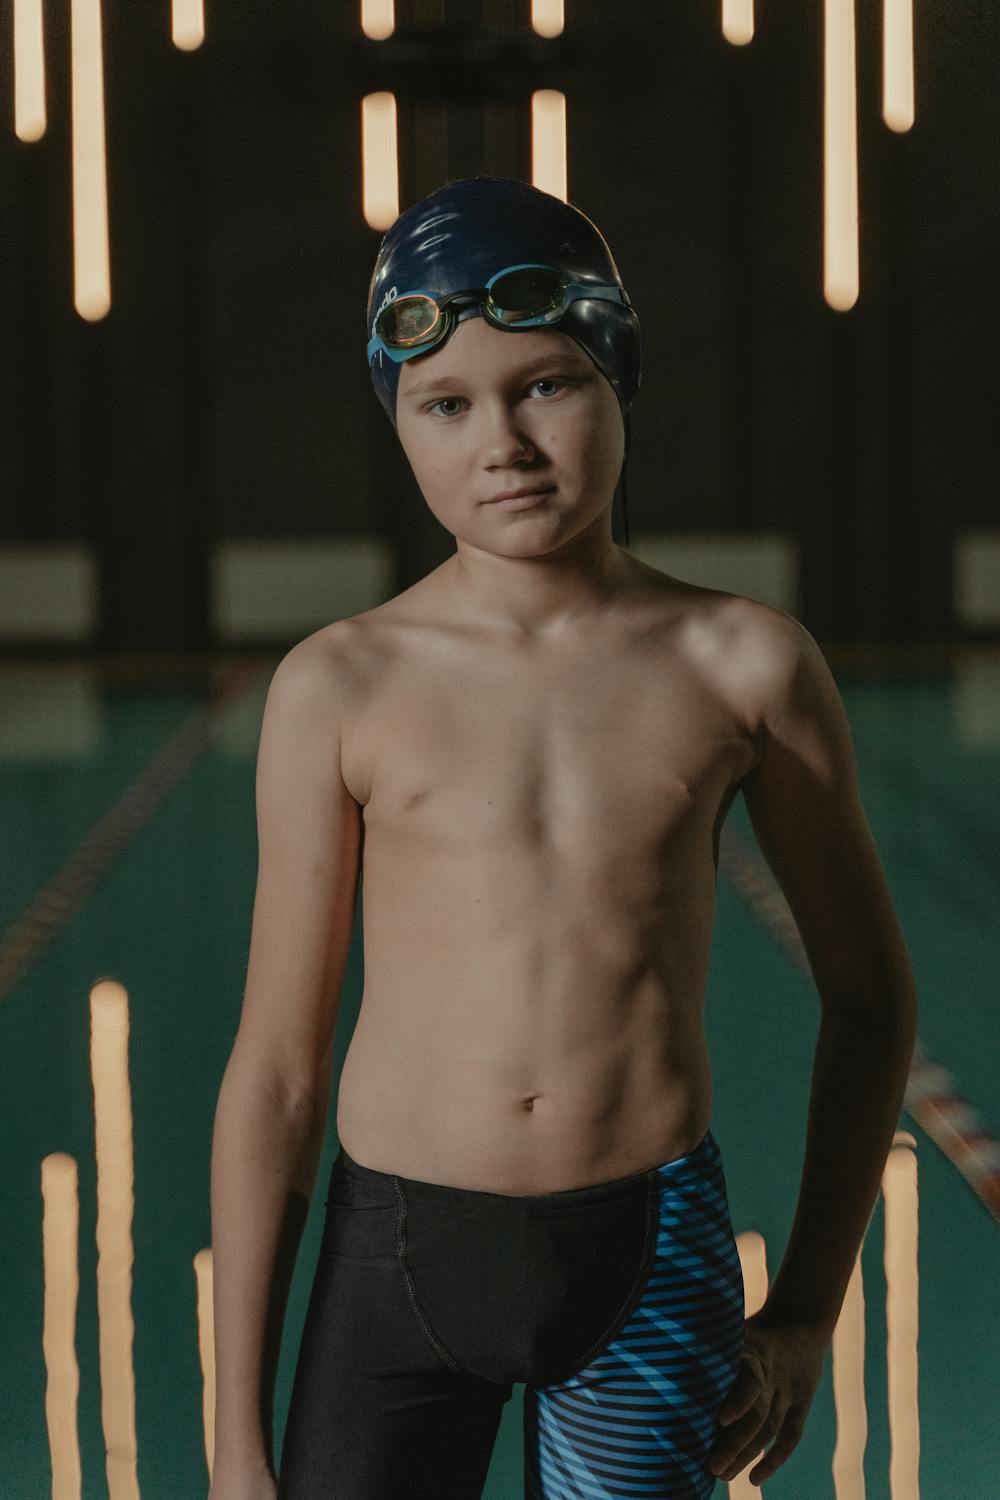 A Shirtless Boy Wearing a Swimming Cap and Goggles on His Head · Free ...